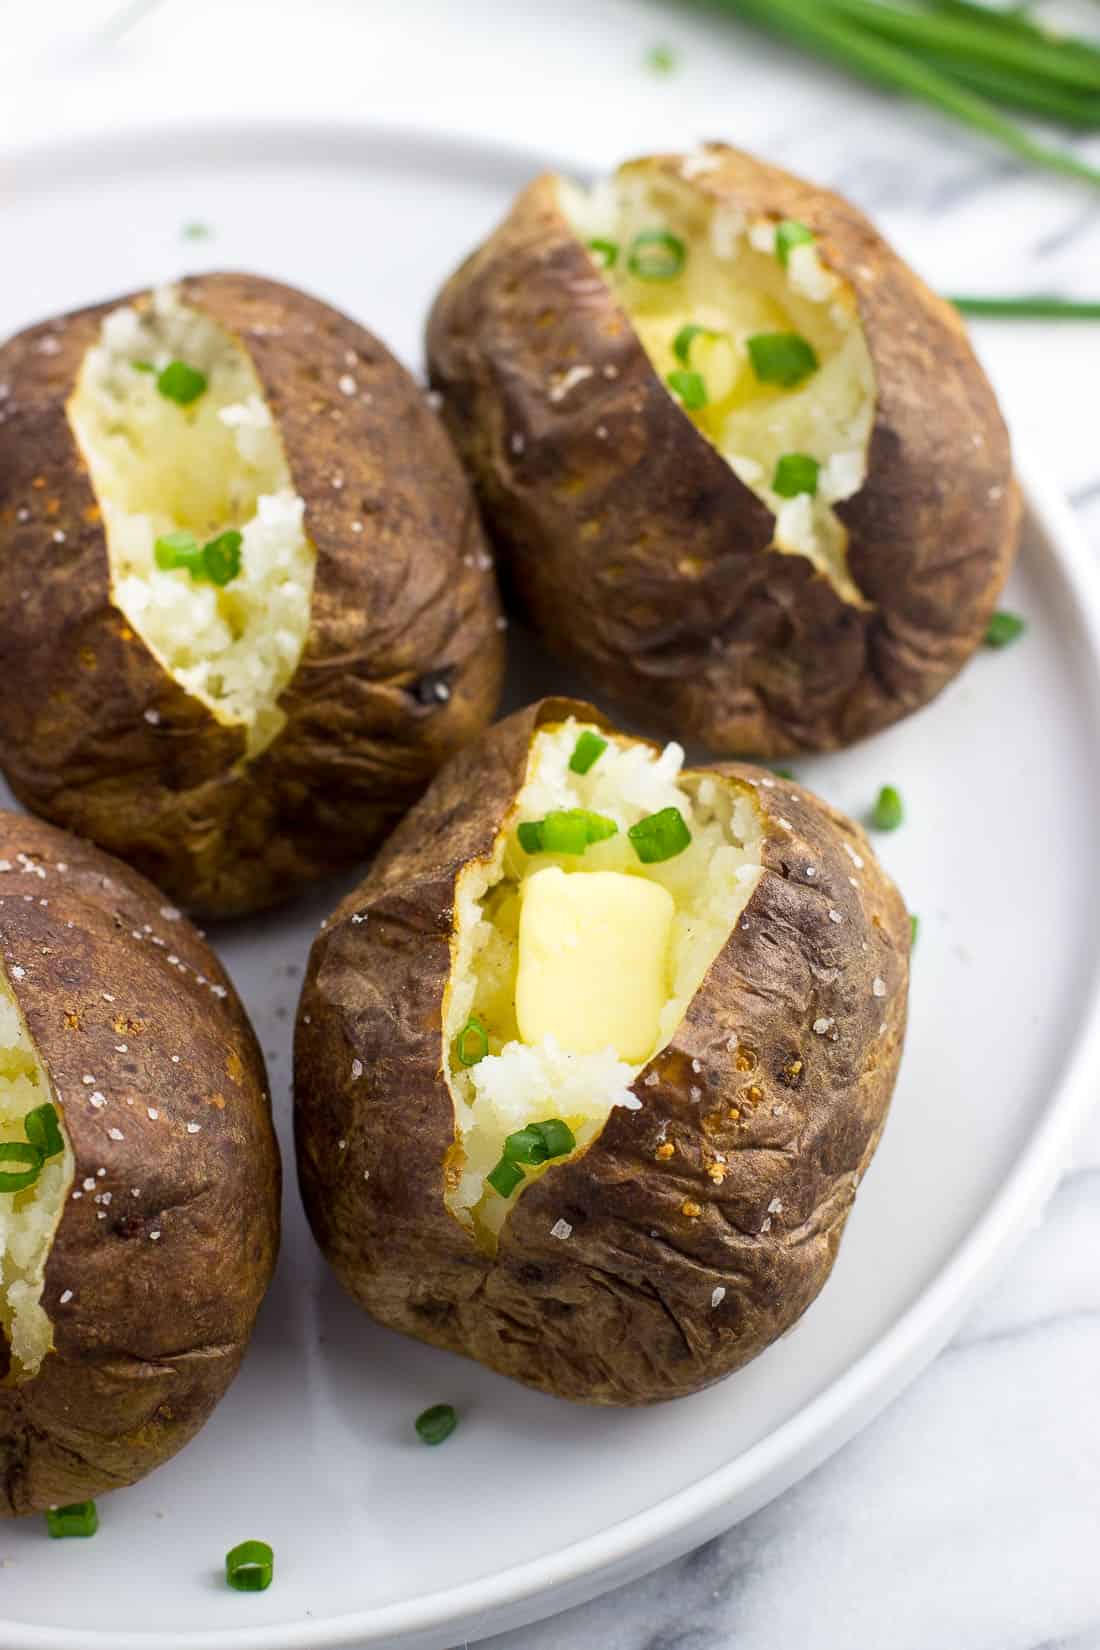 Air fryer baked potatoes on a plate.